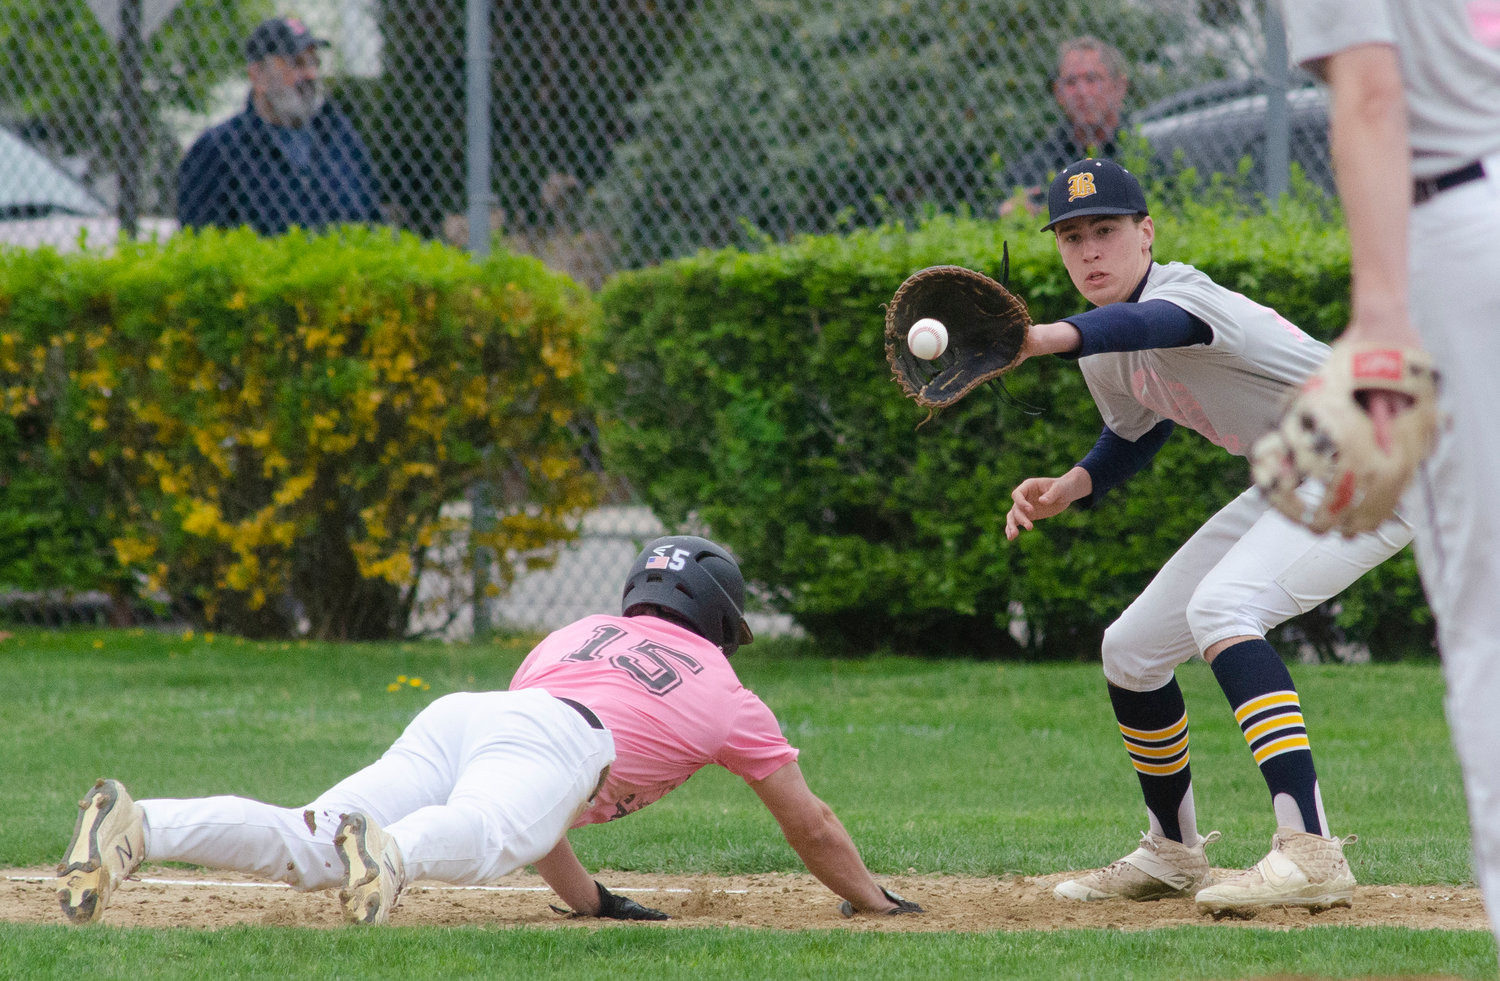 Eagles’ first baseman Nick Scandura stretches to catch a pick-off attempt from Harrison Cooley during a game against Mt. Hope on Friday. The two teams used the game as a fund-raiser for the Jimmy Fund, collecting more than $5,000 in donations.